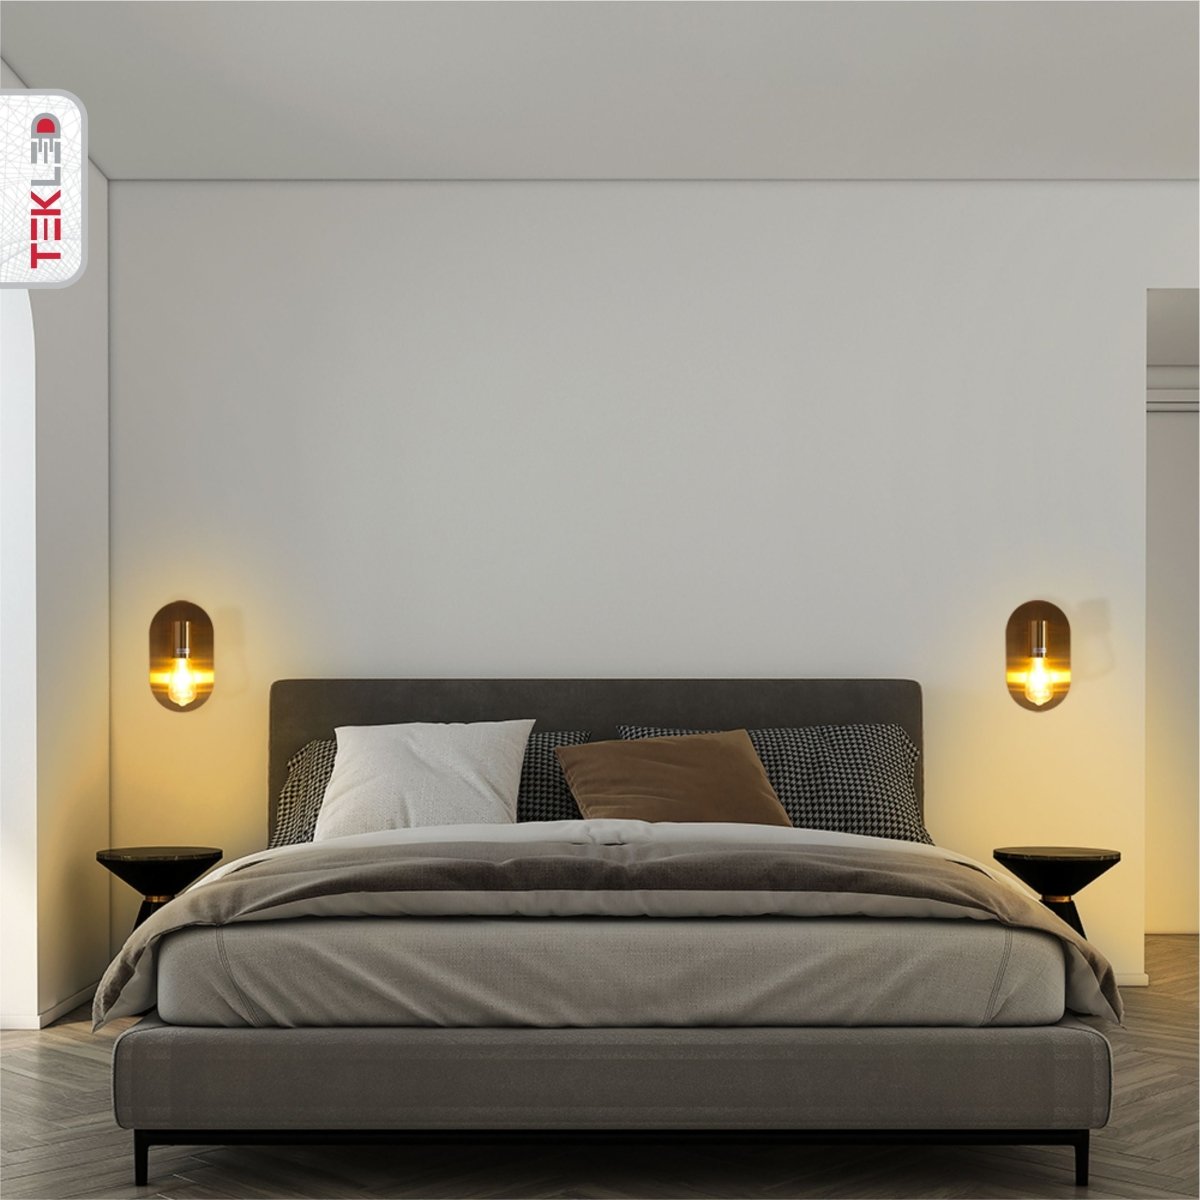 Interior application of Gold Metal Wall Light with E27 Fitting | TEKLED 151-19736